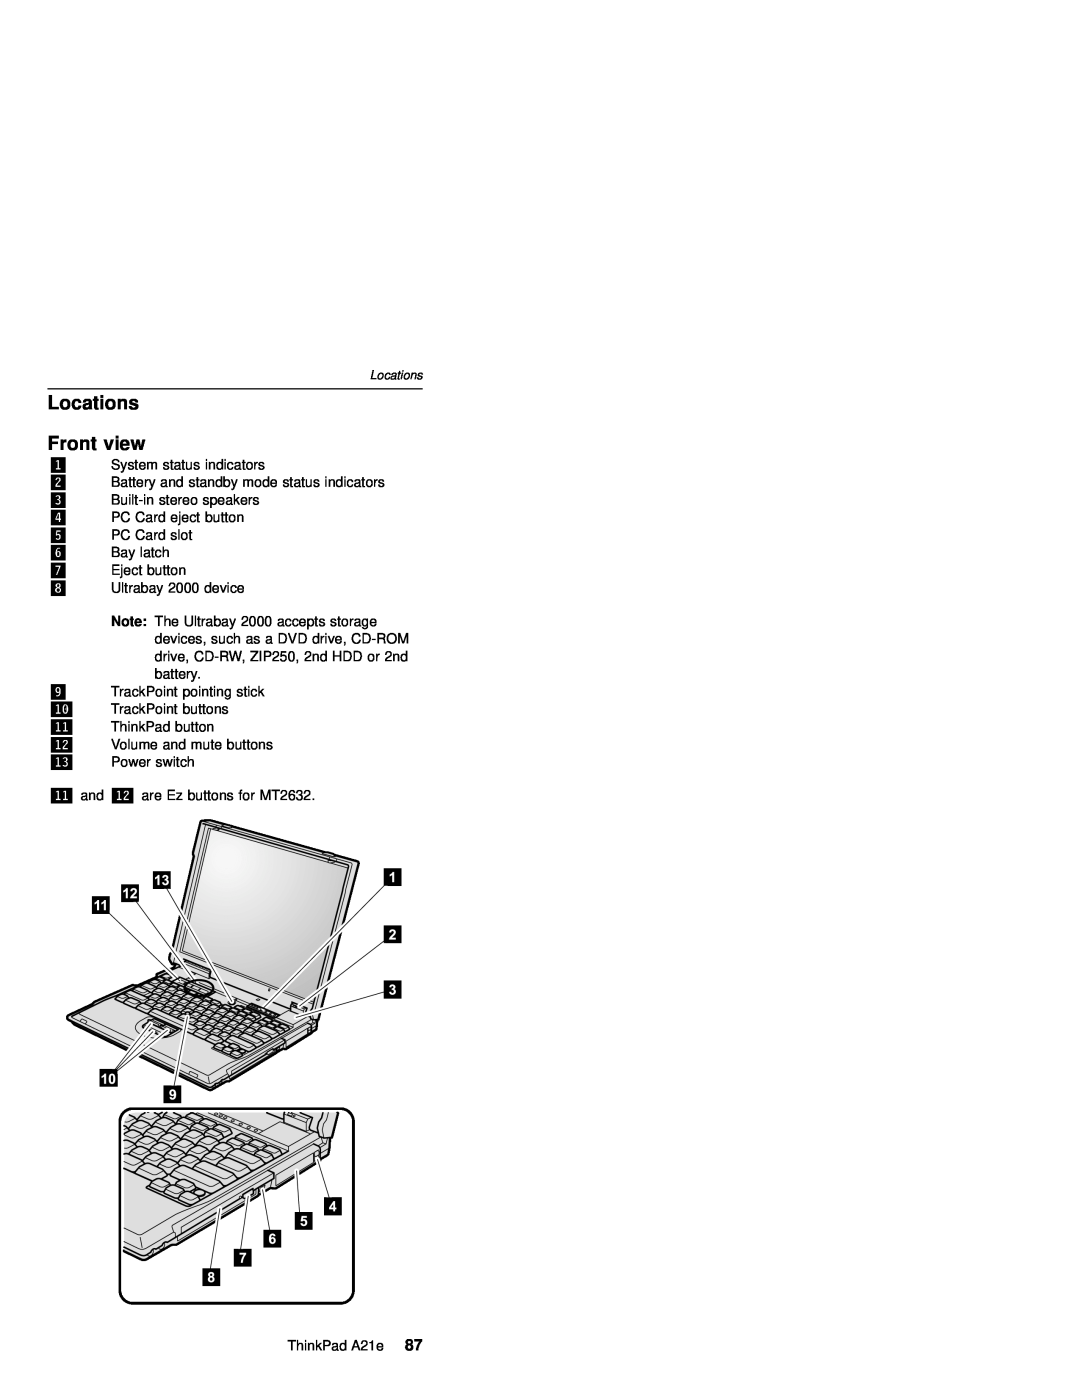 IBM MT 2632 manual Locations Front view 